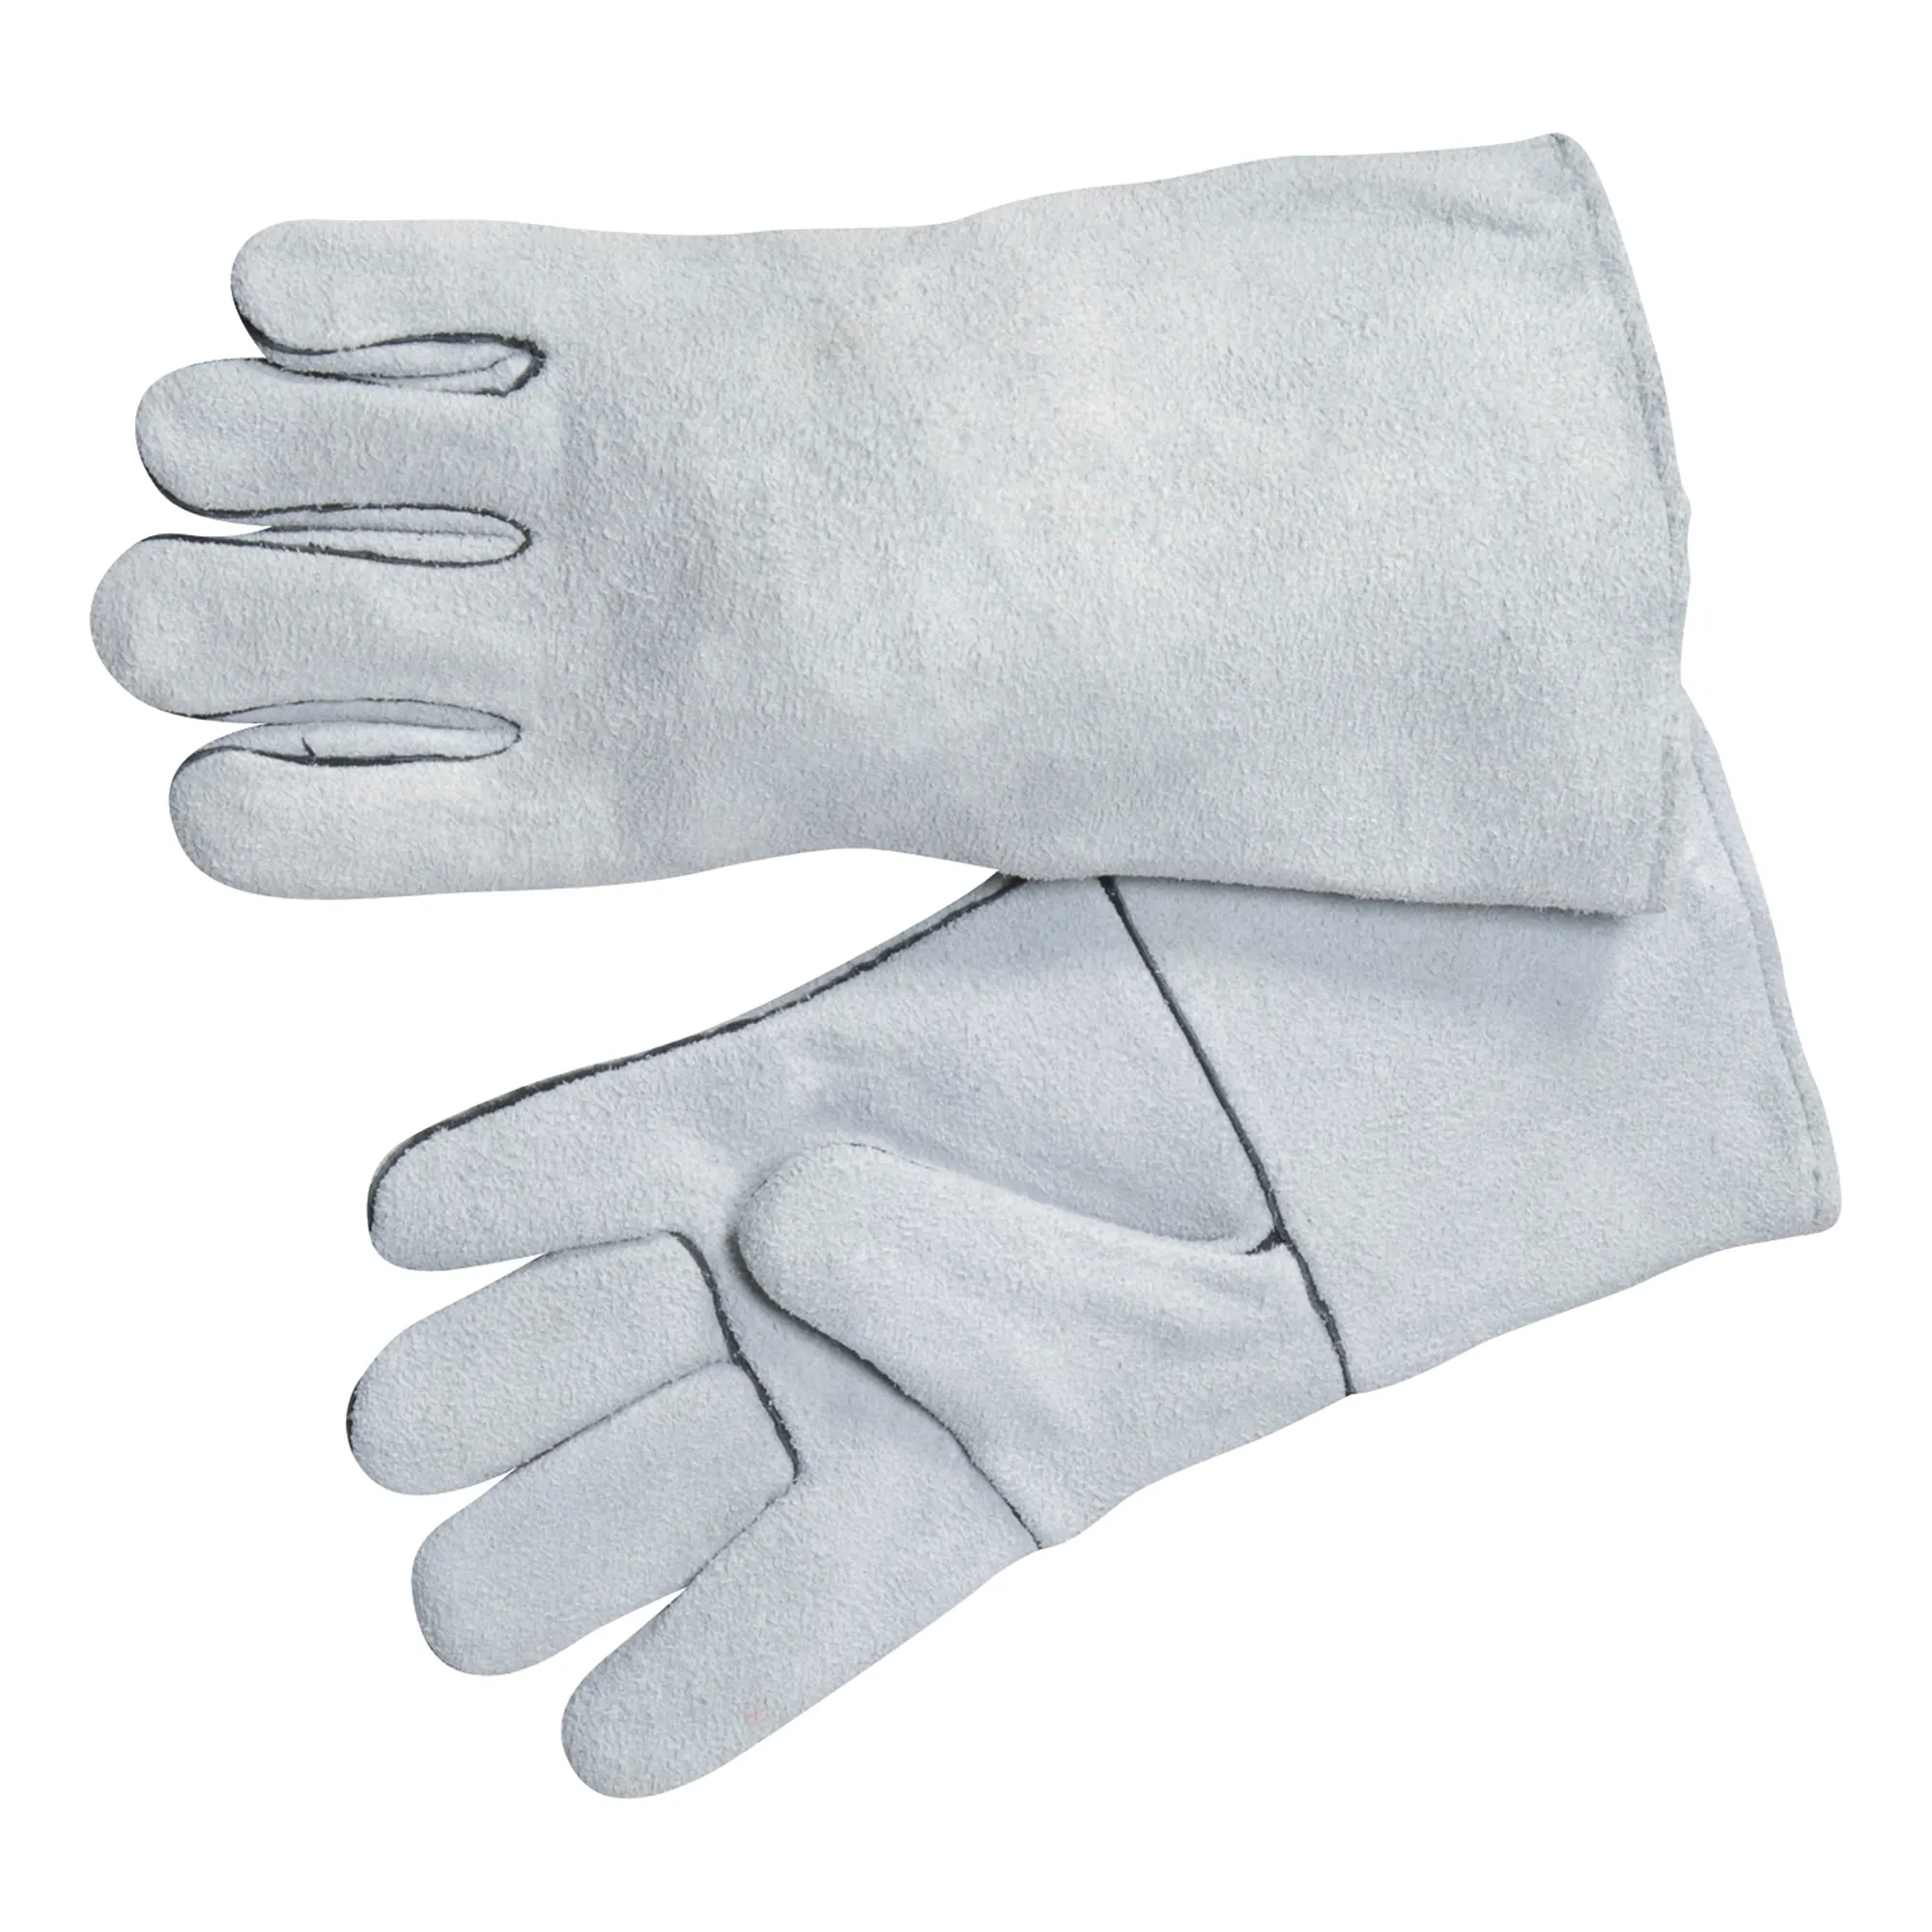 Wholesale cow split leather welding gloves/Customized grey split leather welding gloves black piping/Natural gray working gloves